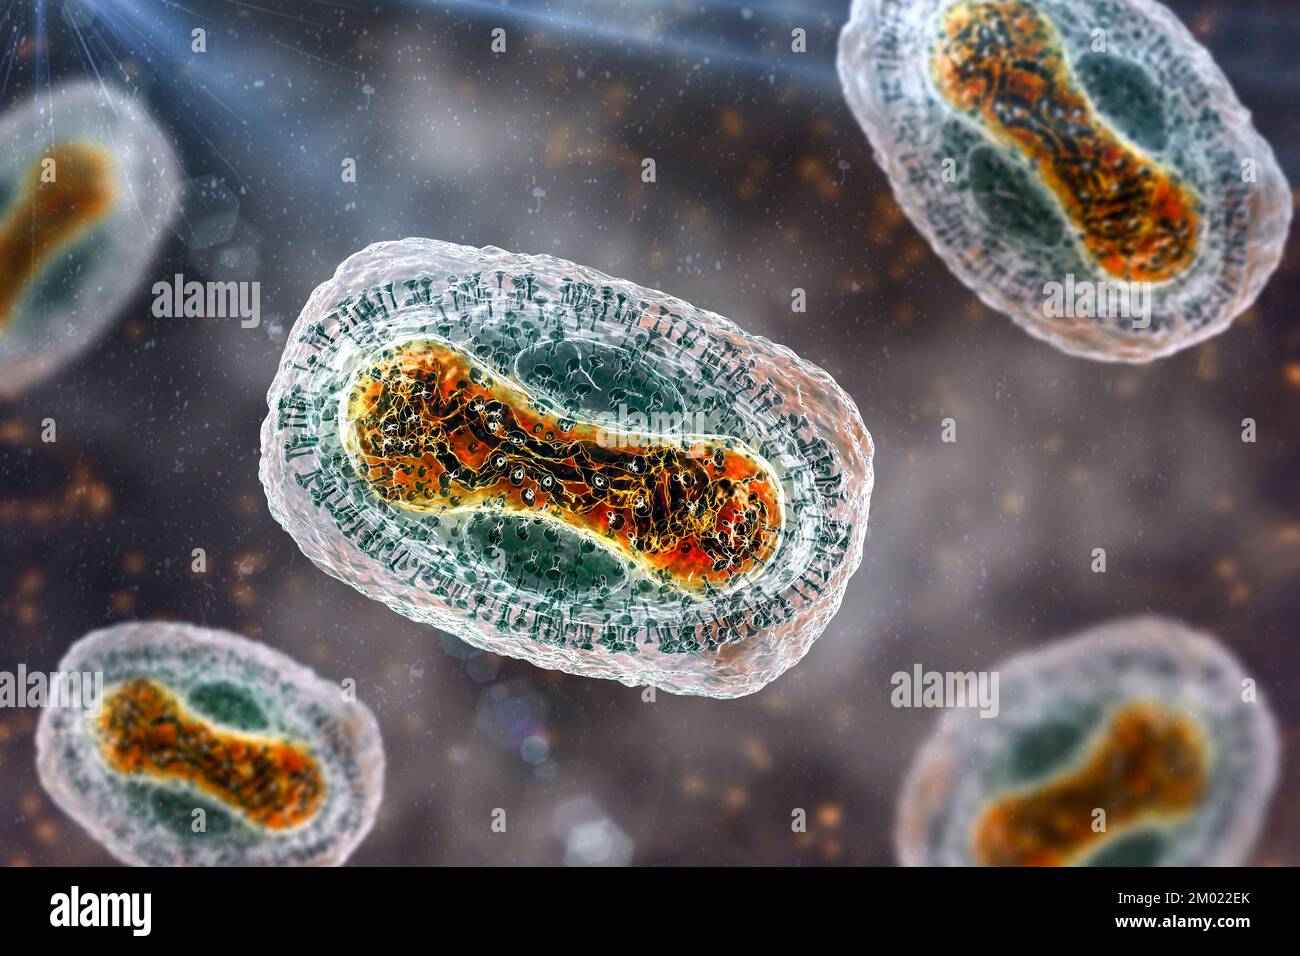 Monkeypox virus particles, illustration. Monkeypox virus particles are composed of a DNA (deoxyribonucleic acid) genome surrounded by a protein coat a Stock Photo